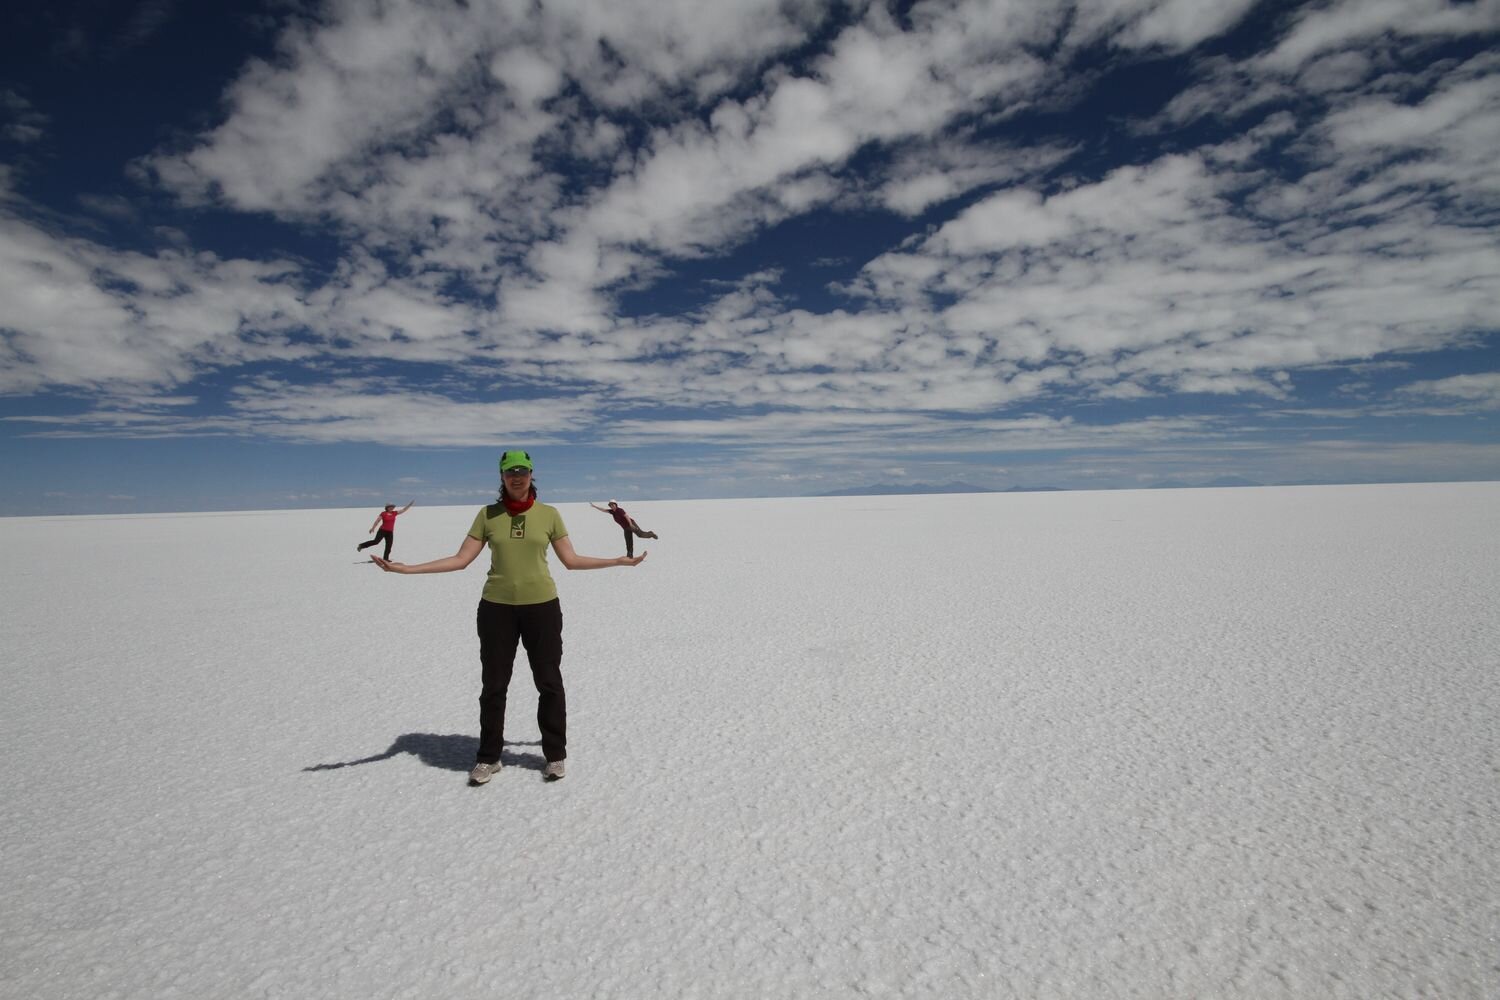  Uyuni Salt Flat, the largest salt flat in the world. Its main feature is the purity of the salt, that makes it perfectly white.  